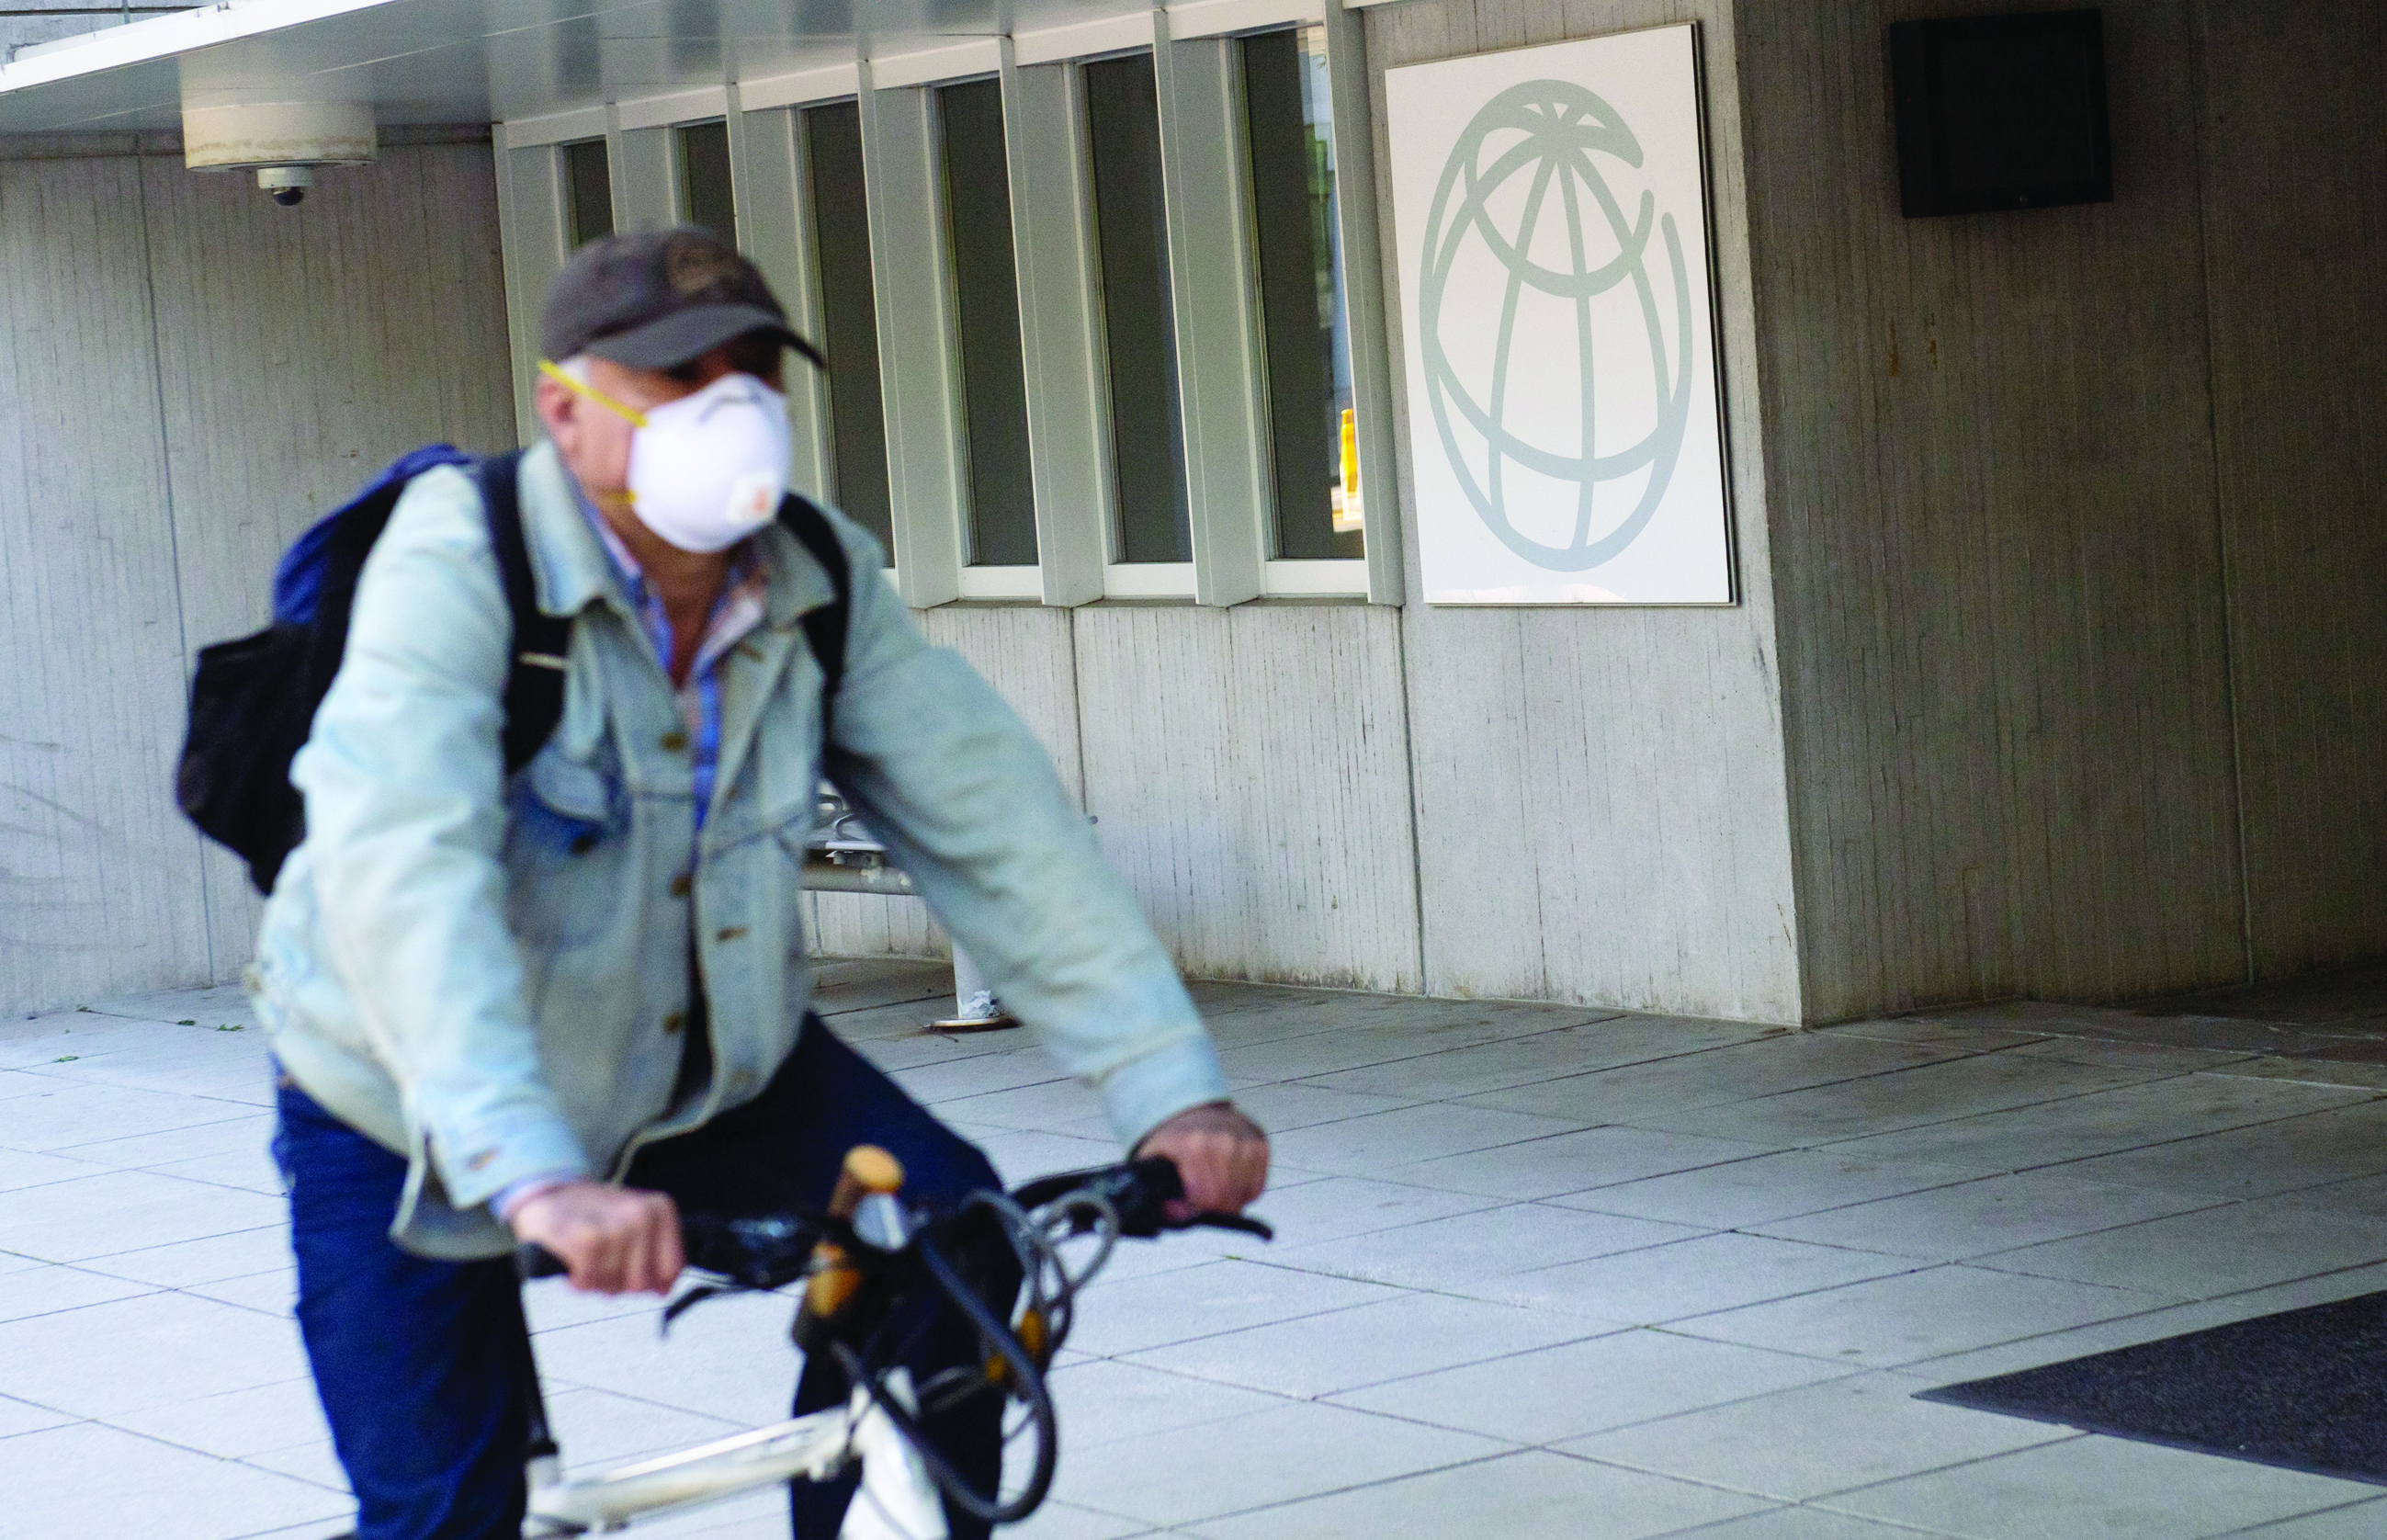 (FILES) In this file photo taken on April 15, 2020 a man rides a bicycle past the headquarters of the World Bank Group as the International Monetary Fund (IMF) and World Bank hold their Spring Meetings virtually due to the outbreak of COVID-19, known as coronavirus, in Washington, DC. - Despite some signs of recovery, the global economy faces continued challenges, including the possibility of a second wave of COVID-19, and governments should keep their support programs in place, IMF chief Kristalina Georgieva said July 16, 2020. (Photo by SAUL LOEB / AFP)